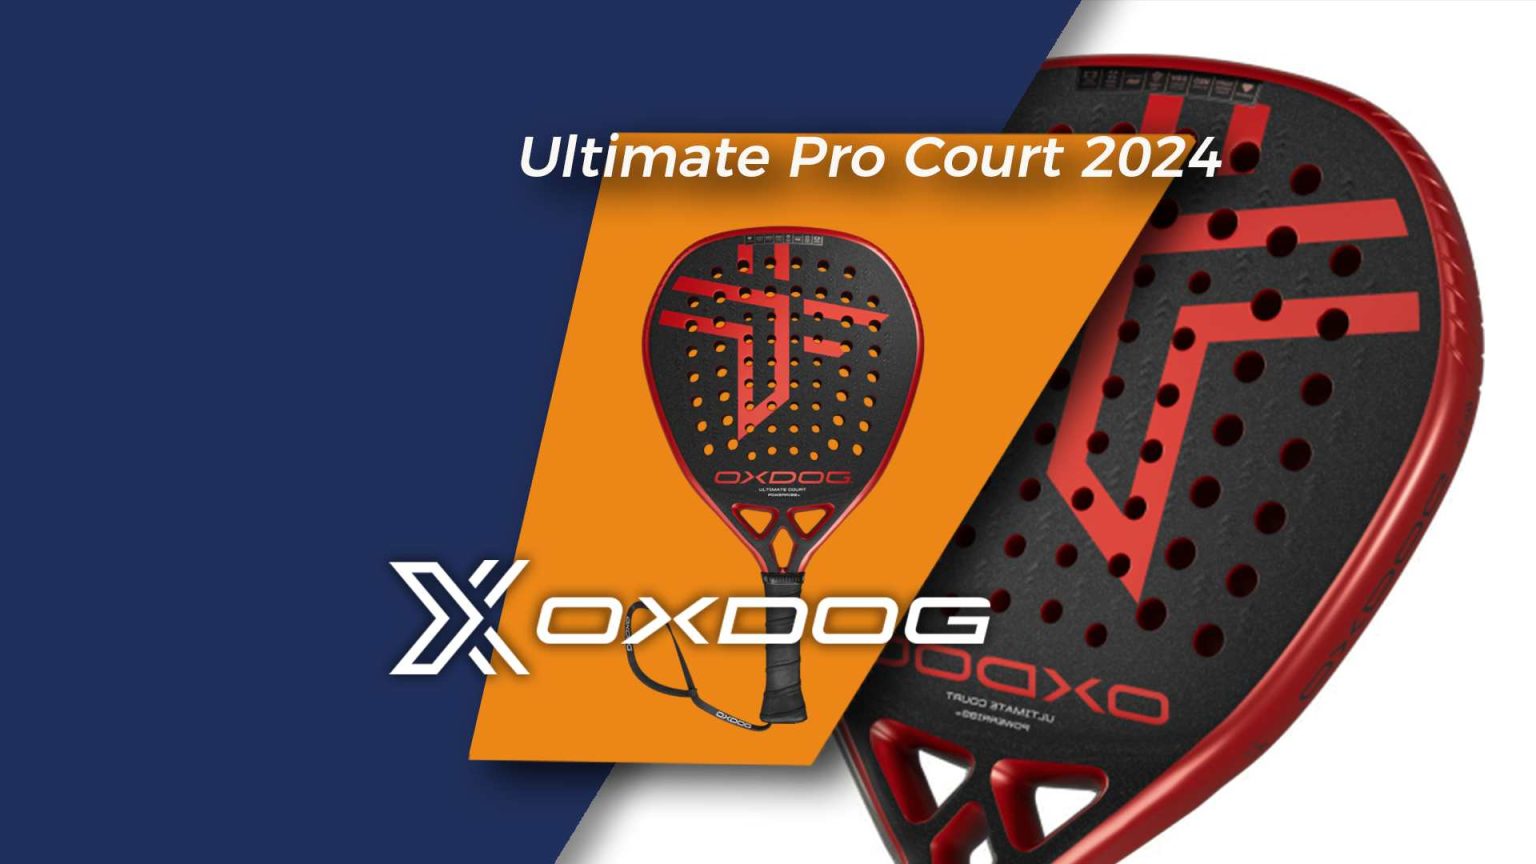 Review-oxdog-Ultimate-court-2024-padelsuis-compressed